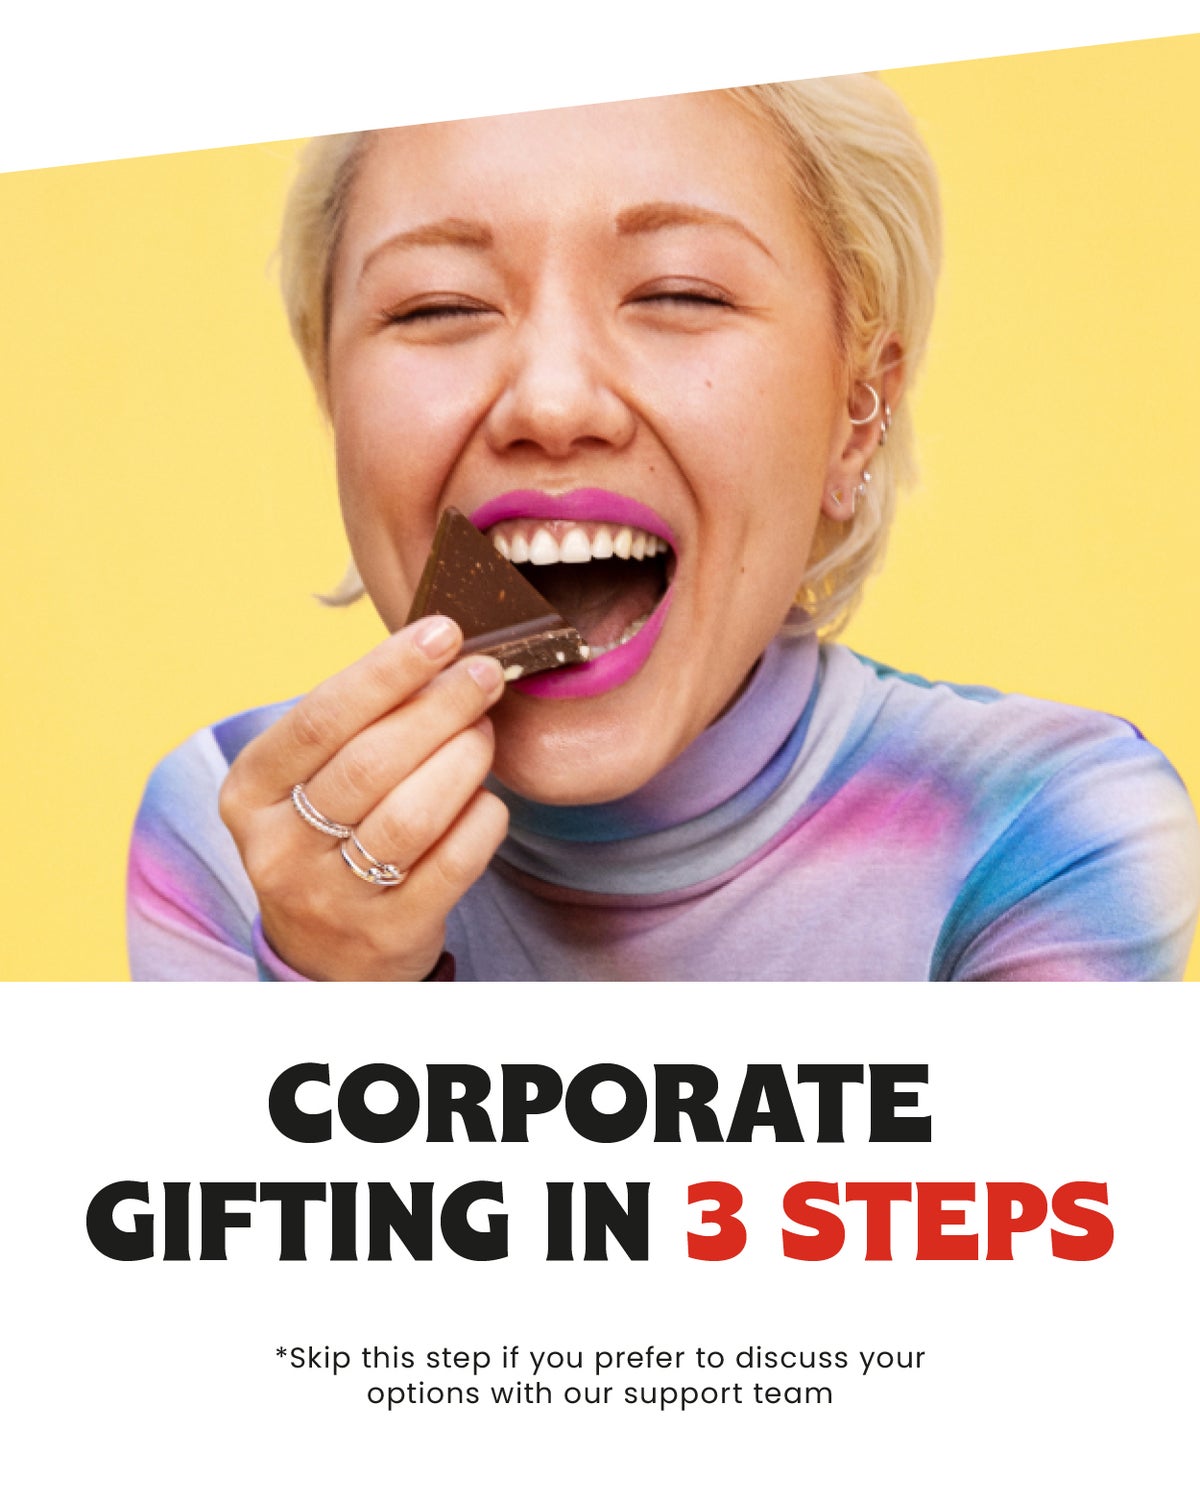 corporate gifting in three steps, skip this step if you prefer to discuss your options with our support team